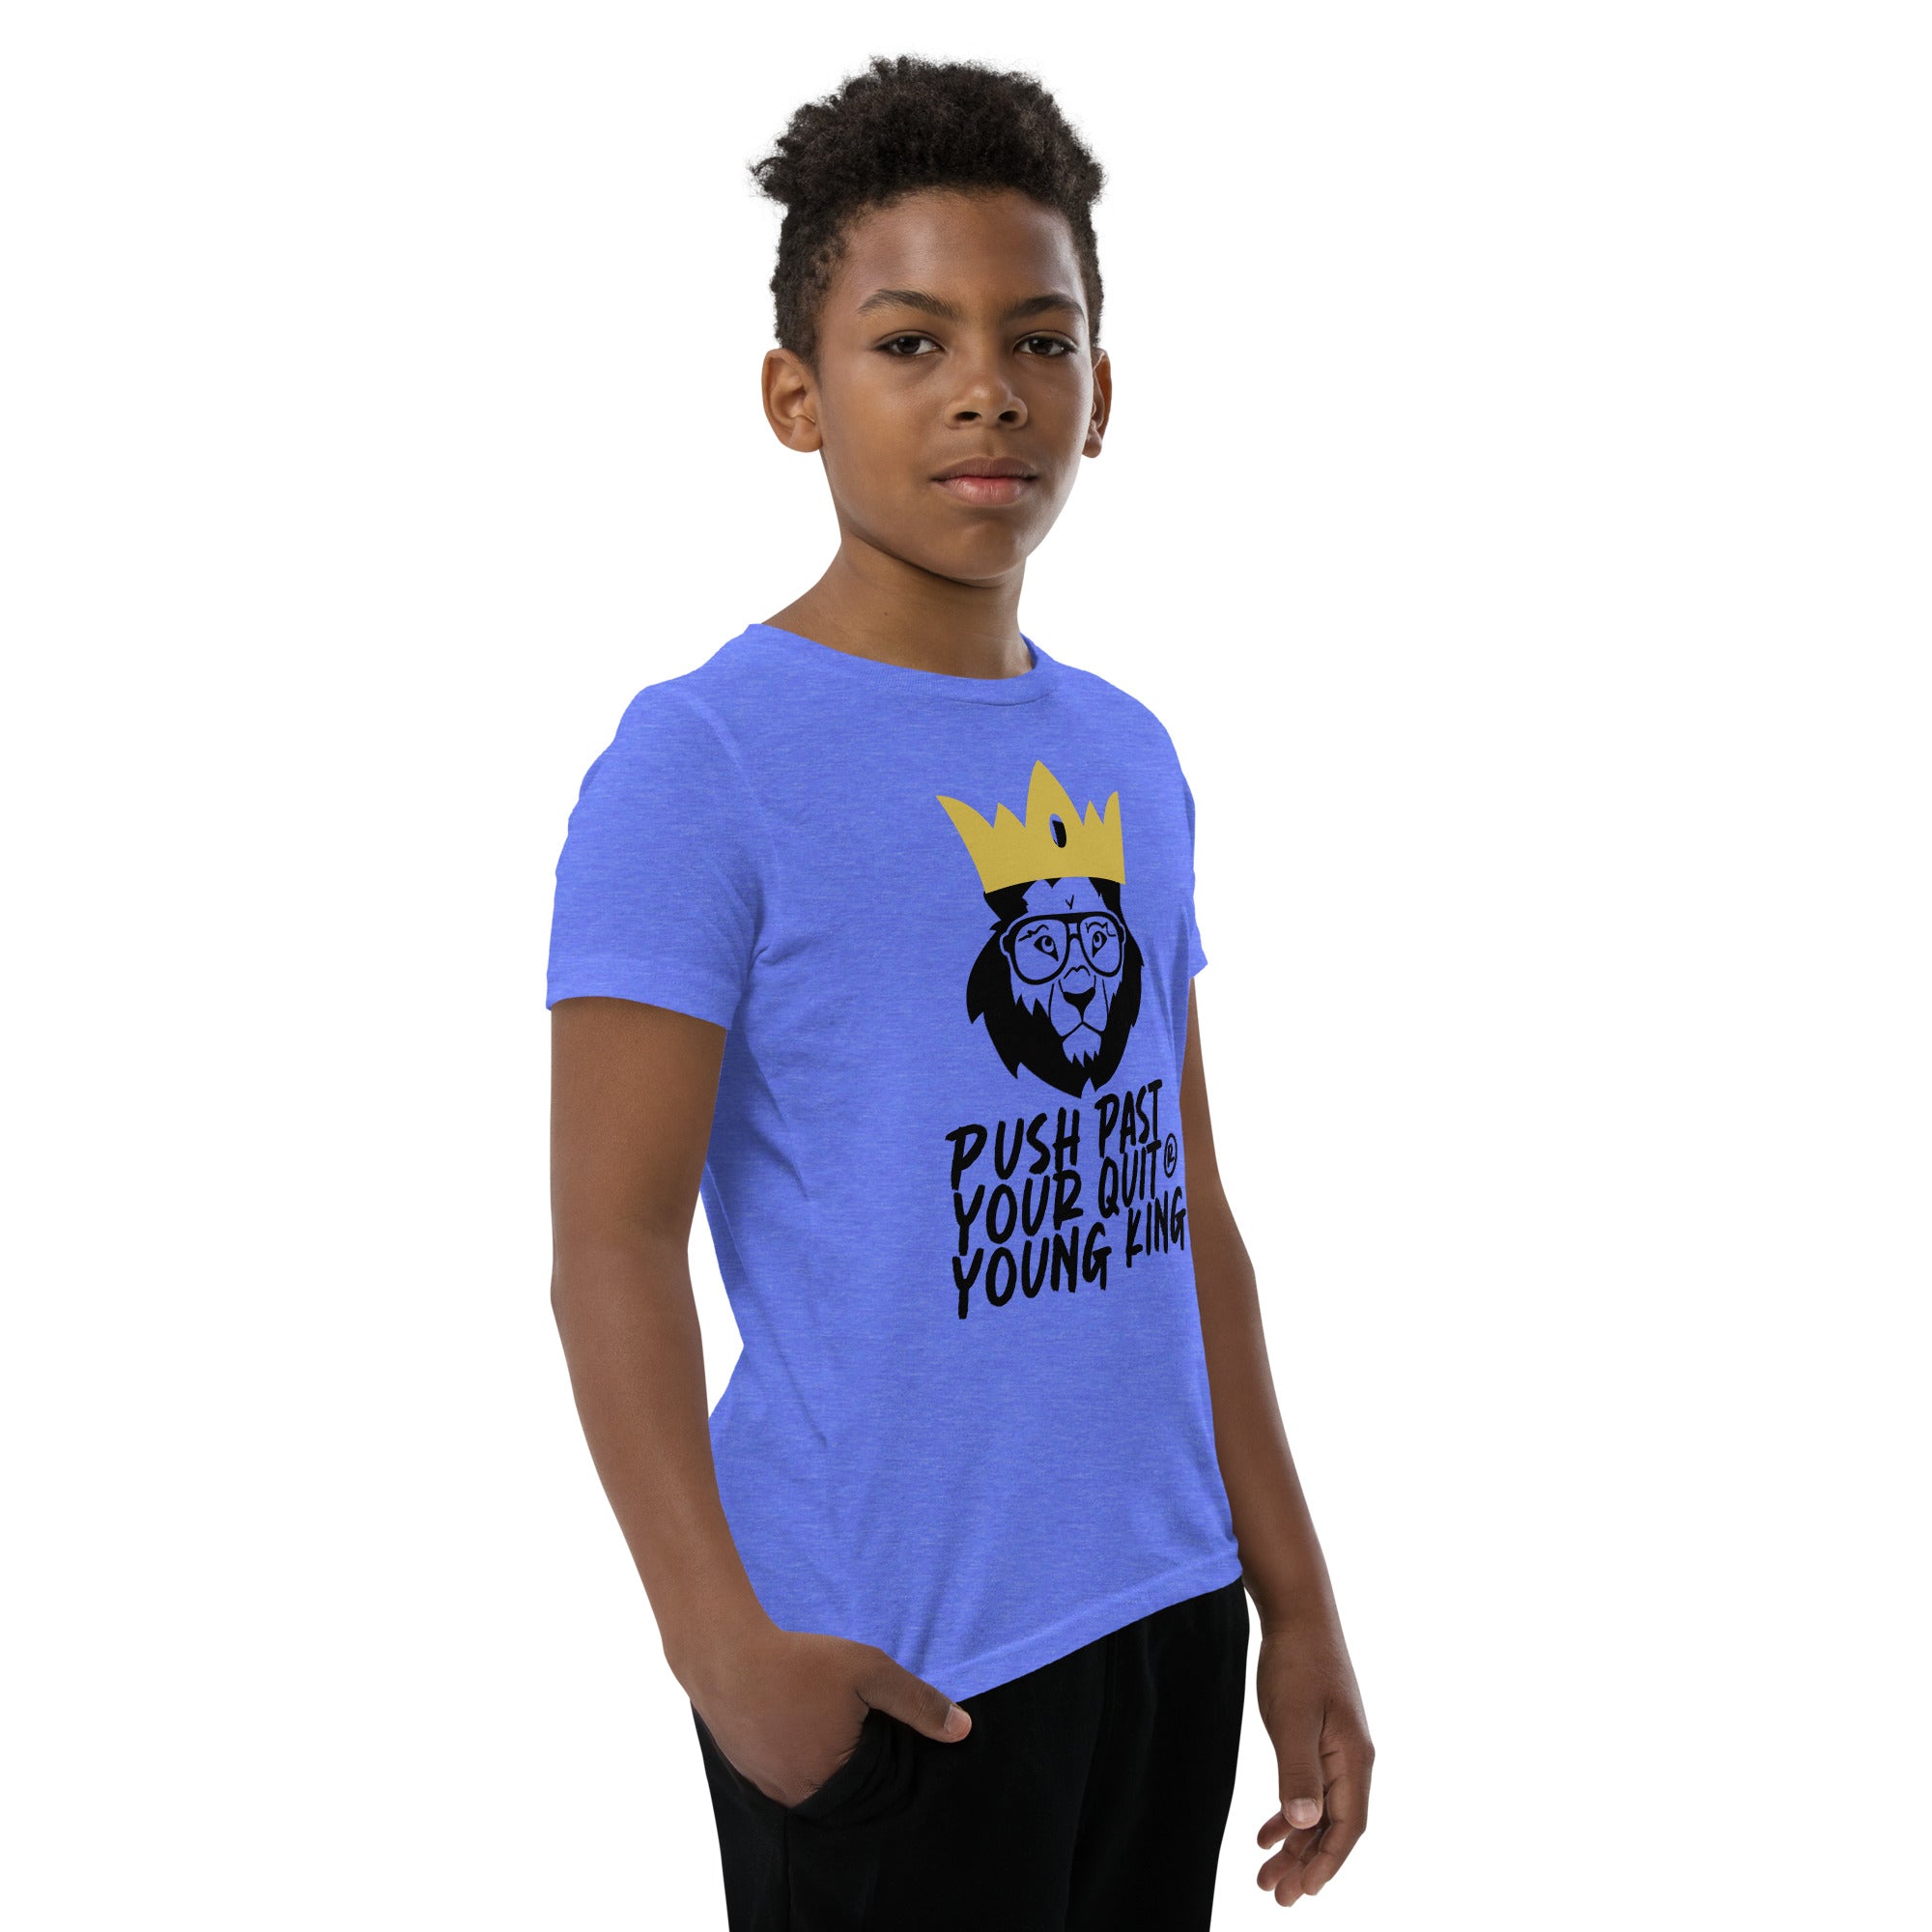 Young King Youth Short Sleeve T-Shirt